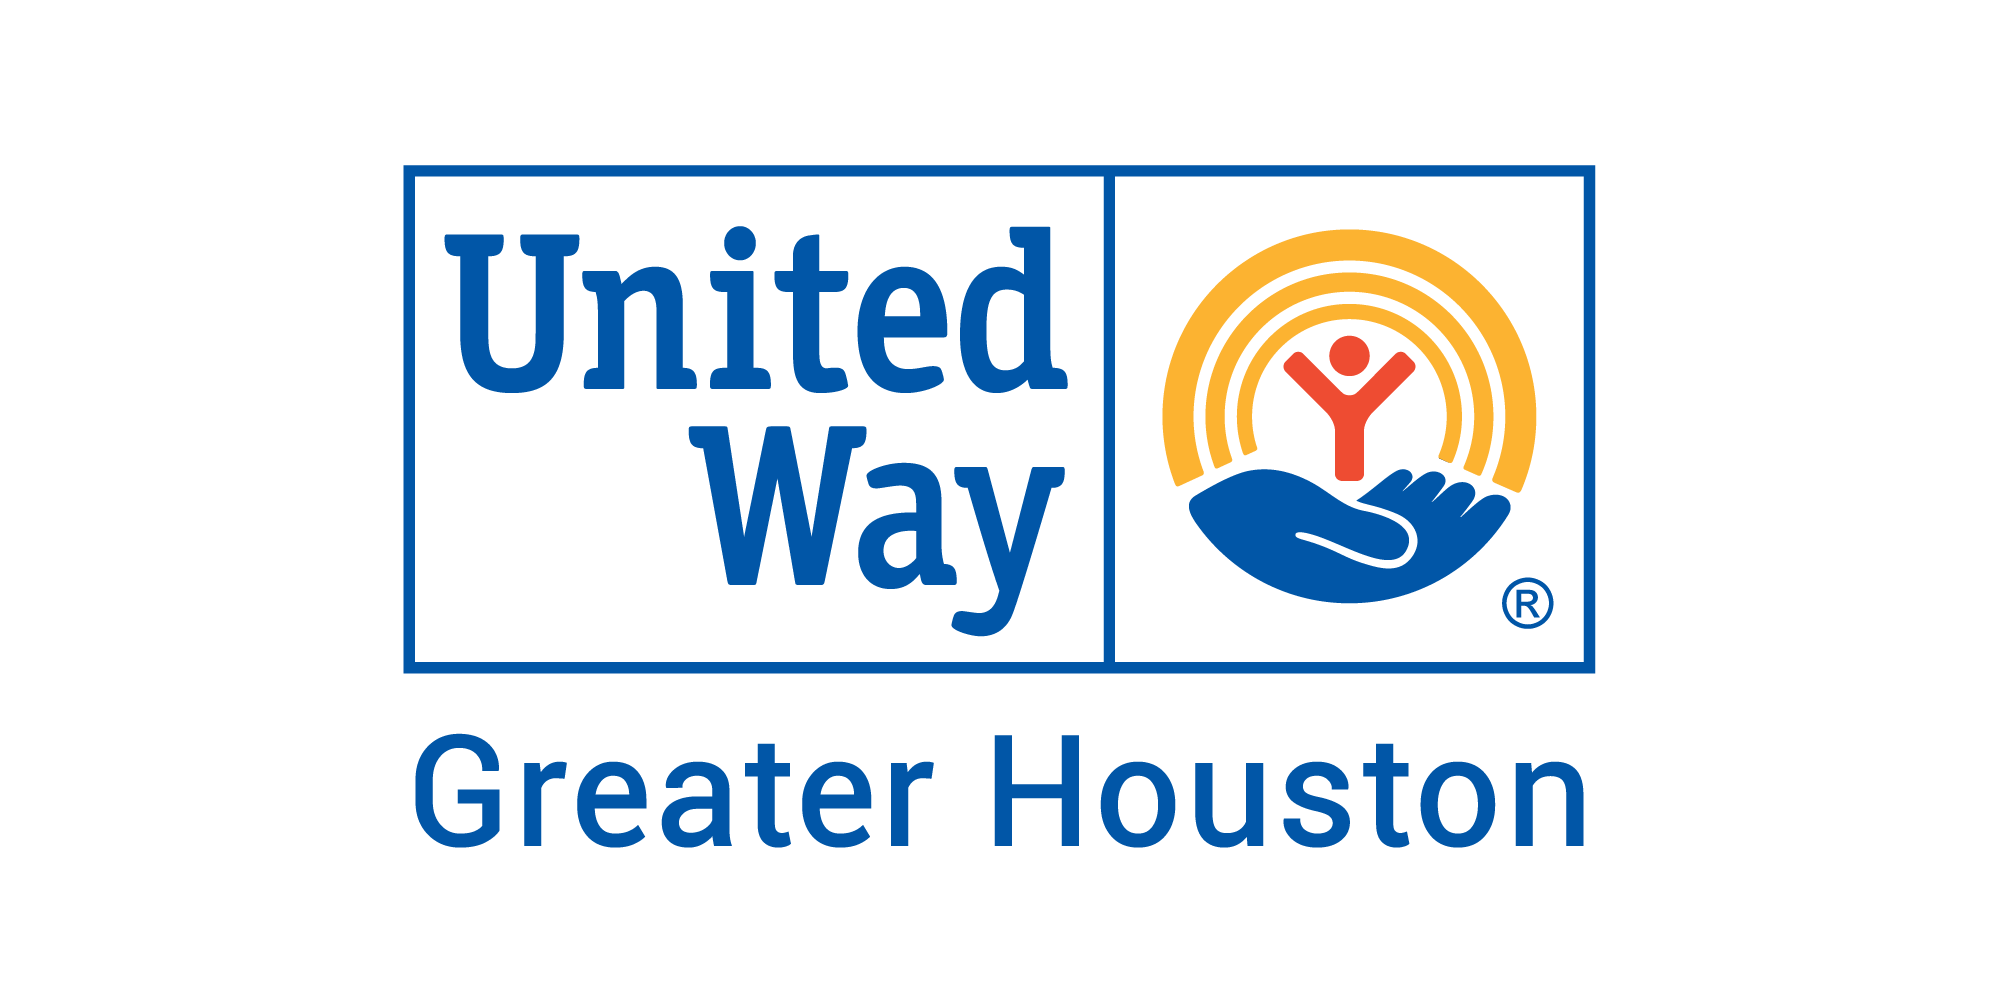 Thrive Campaign for the United Way of Greater Houston